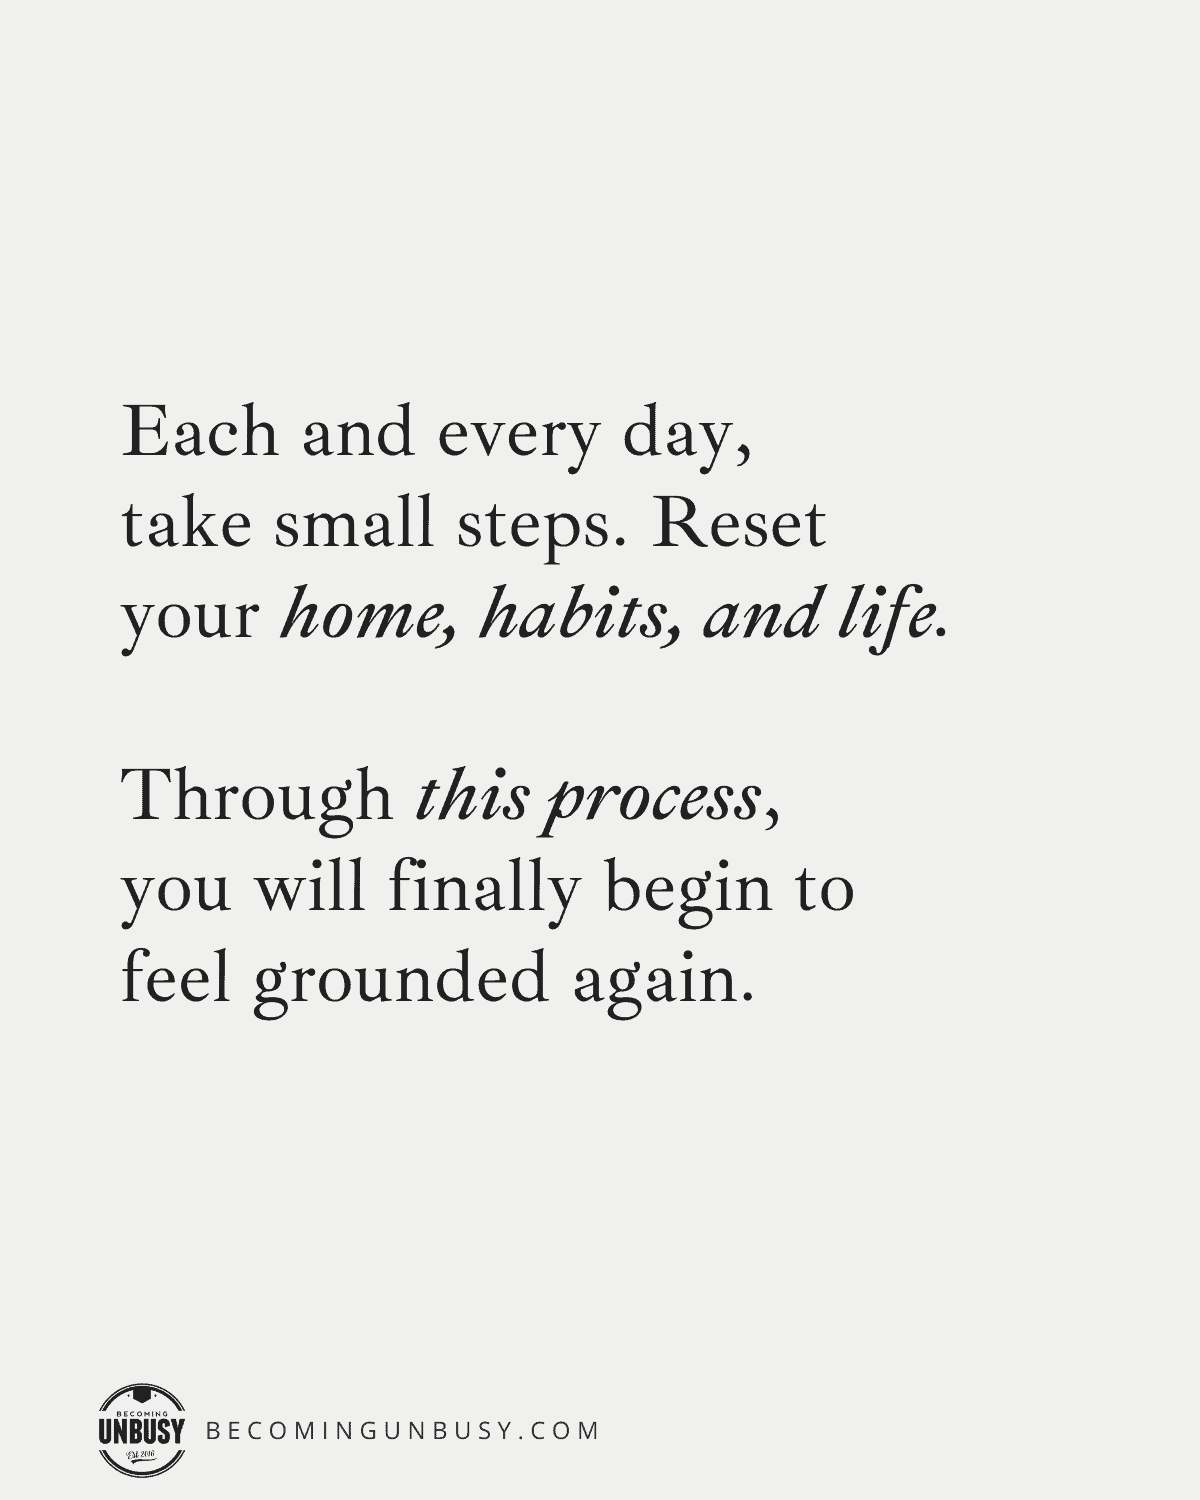 Each day, take small steps to reset your home, habits, and life. 

Through this process, you will begin to feel grounded again.